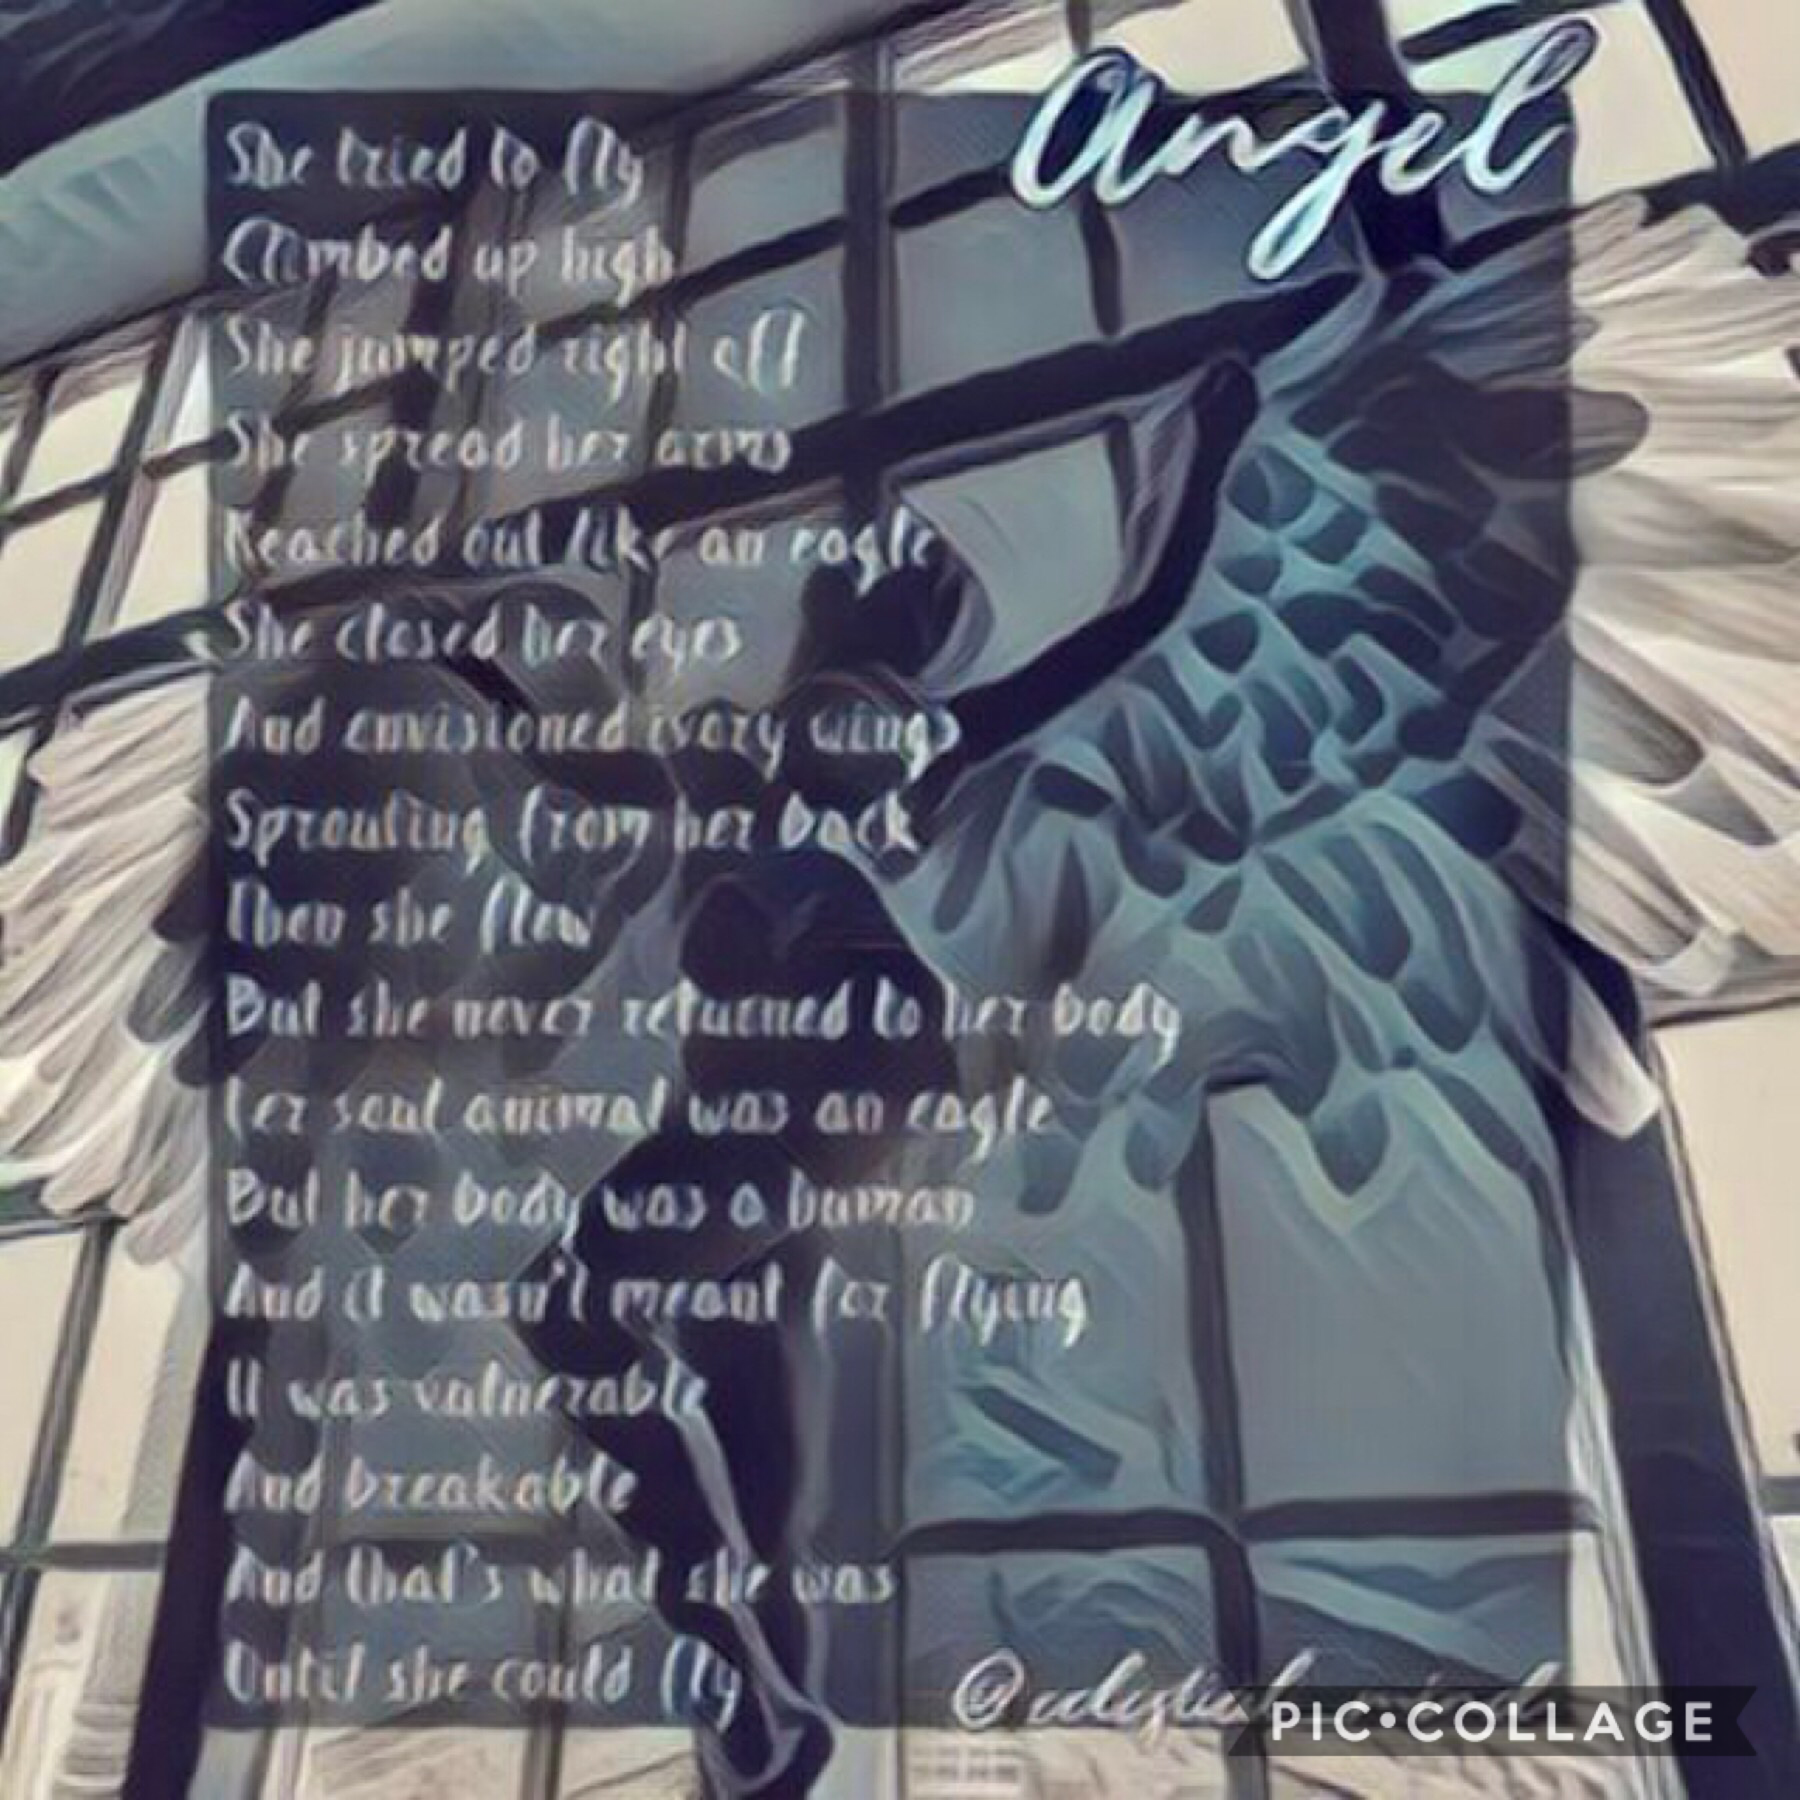 💙😇I hope you like this poem! It’s a little bit depressing but I like it. It’s not my best, but that’s okay.😇💙